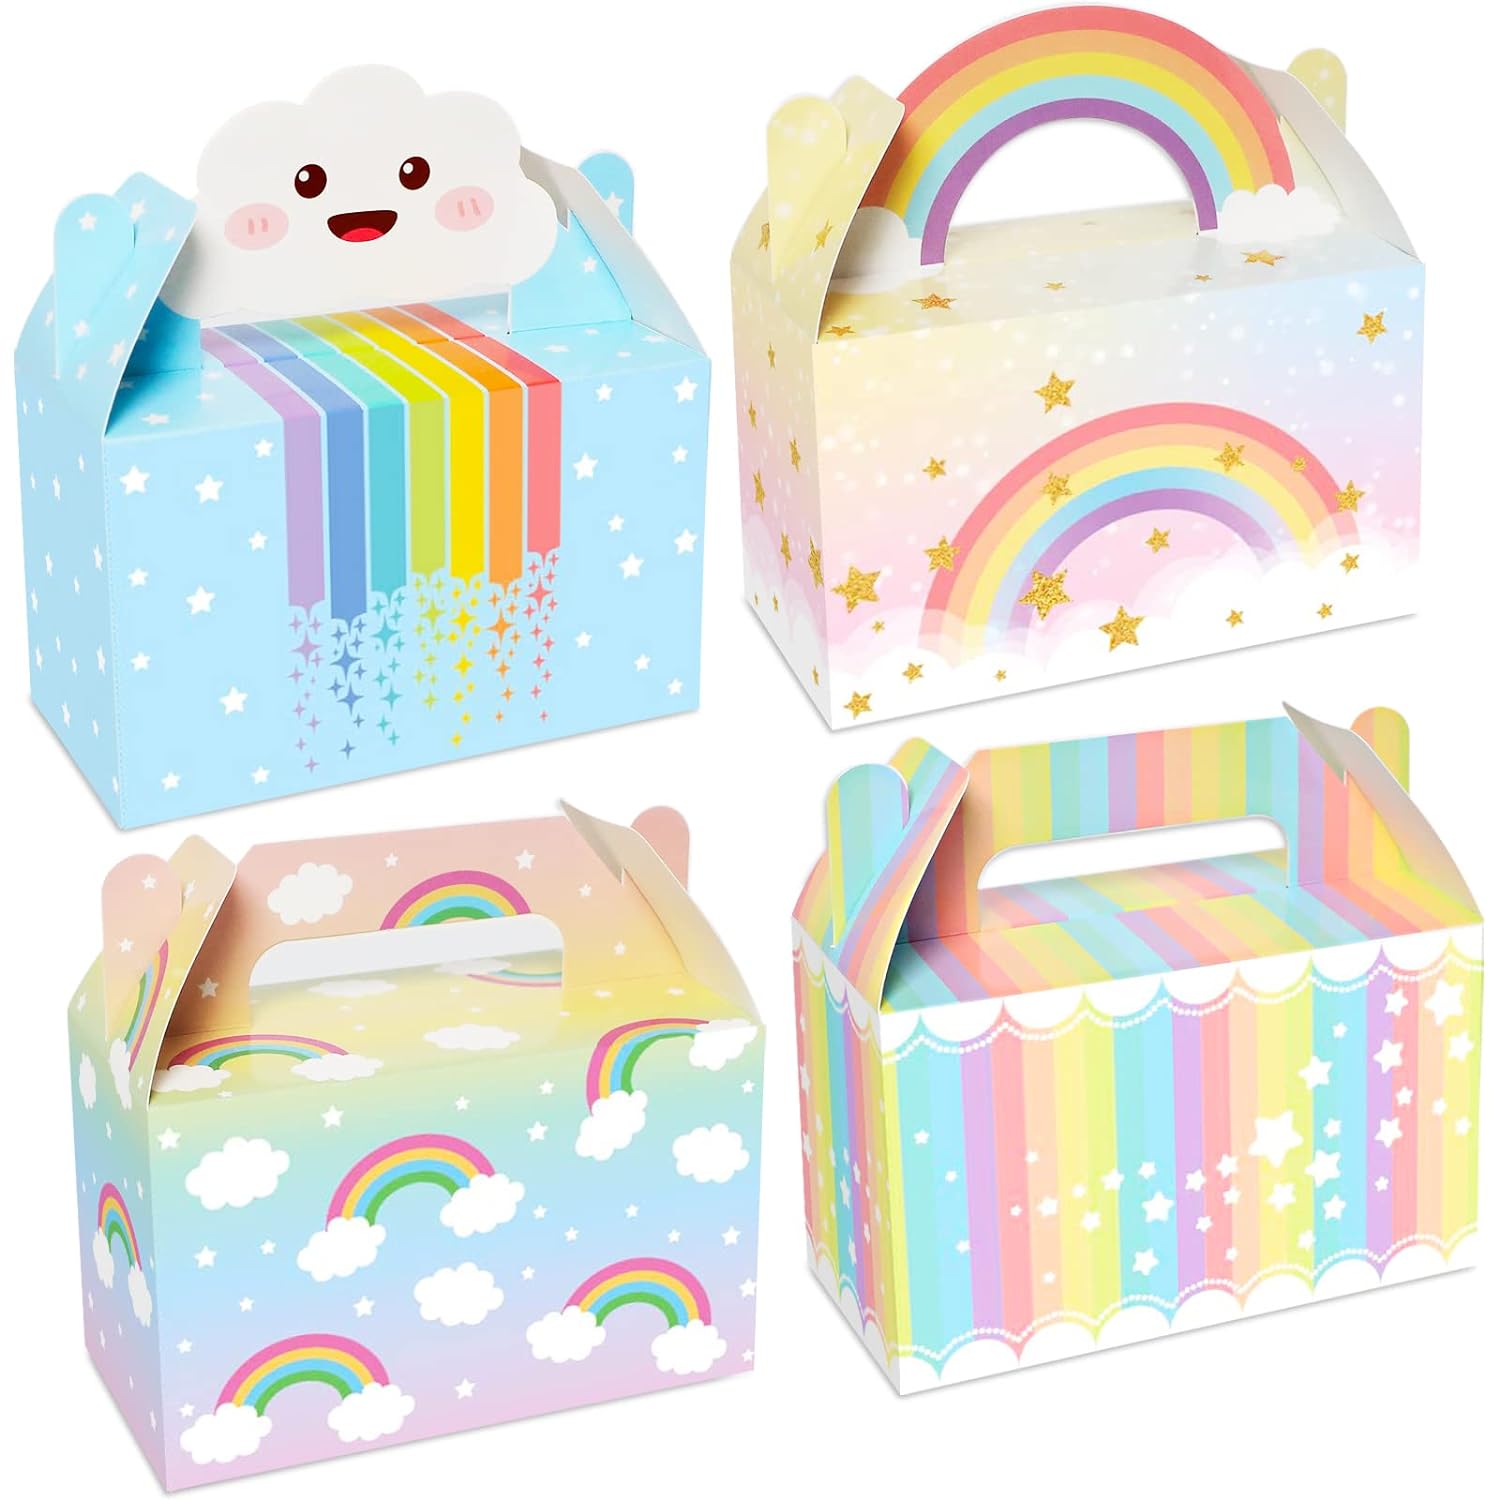 Great Choice Products 12 Pack Rainbow Party Favor Boxes Cloud Pastel Happy Birthday Treat Bags Rainbow Theme Colorful Candy Goodies Valentine'S Day…